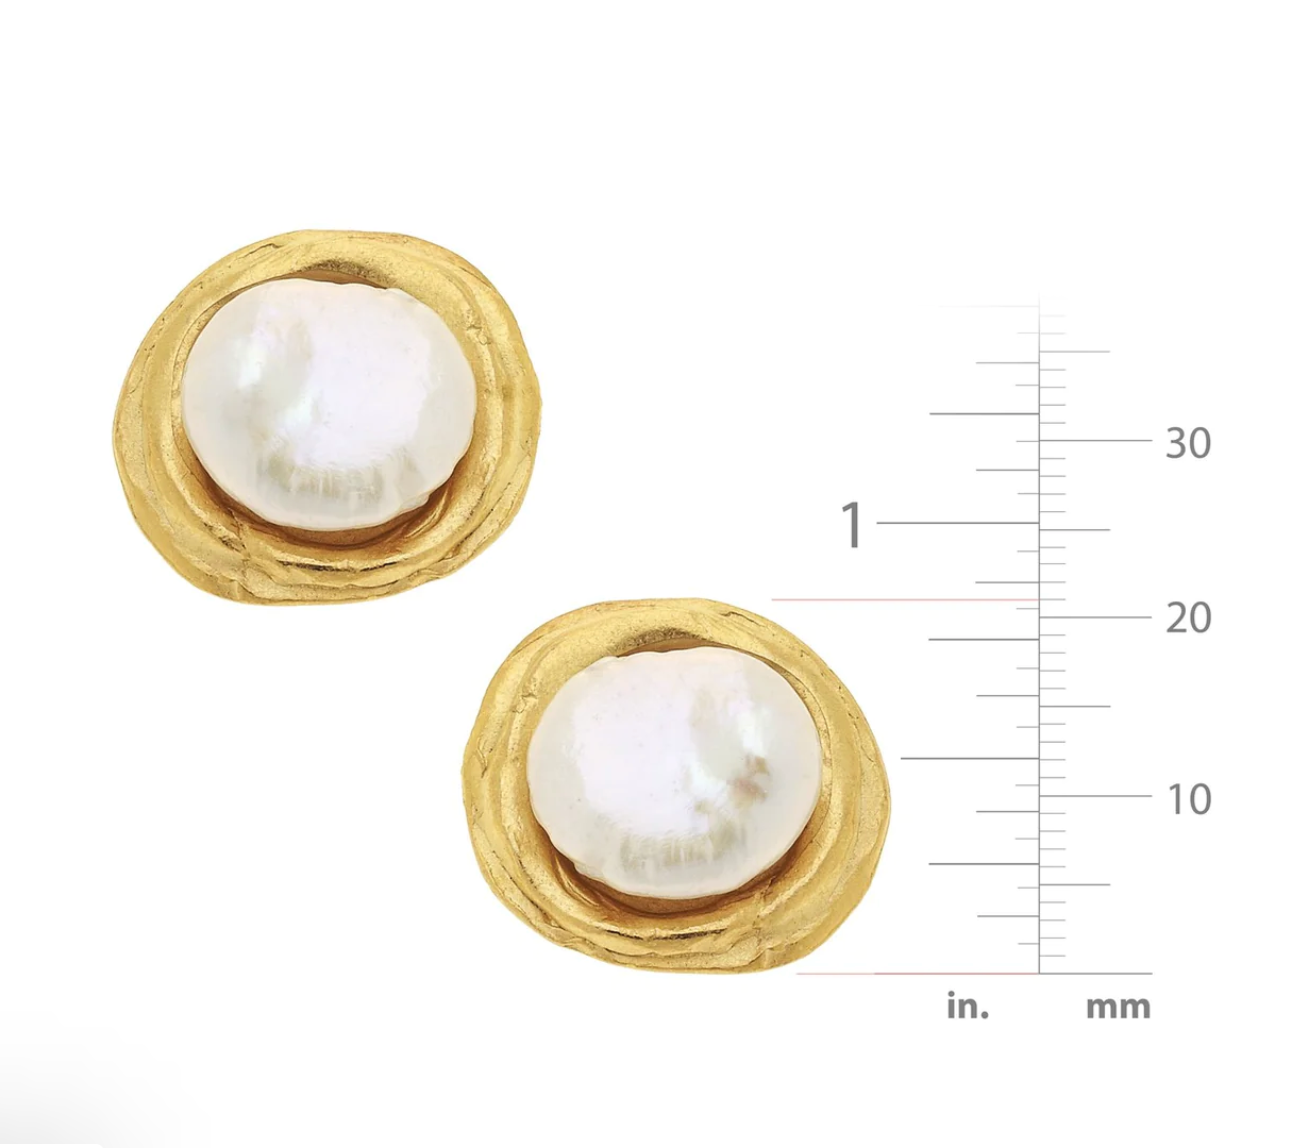 SUSAN SHAW Gold with White Coil Pearl CLIP Earrings - gold